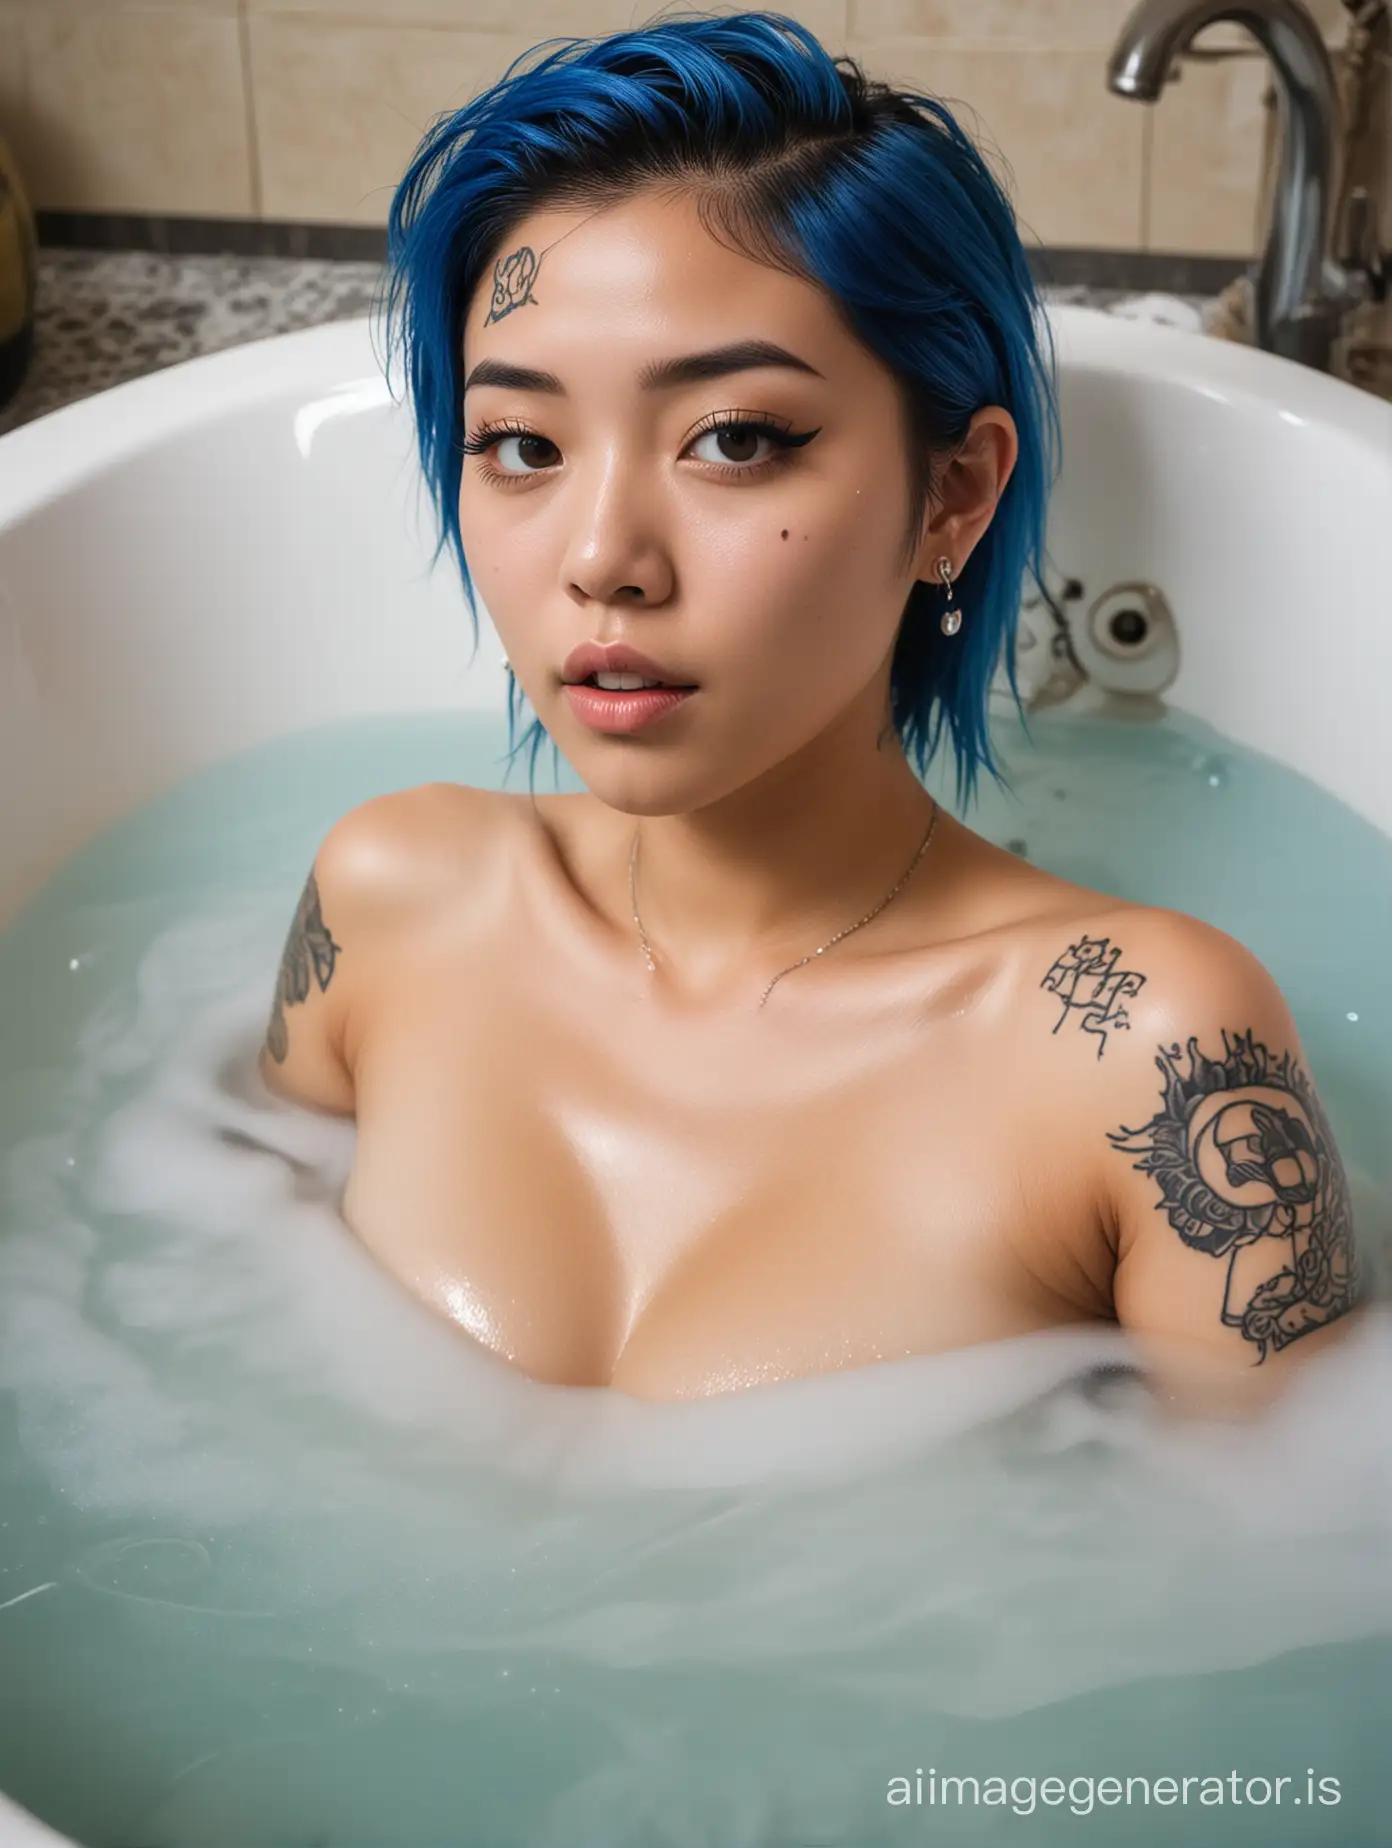 A girl is taking a bubble bath in an old-fashioned bathtub. She is a sultry, petite Asian girl with small breasts, tattoos, and piercings. Her blue hair is slicked back, sleek, and has multiple shades of blue running through it. It's a perfect mix of edgy and classic.